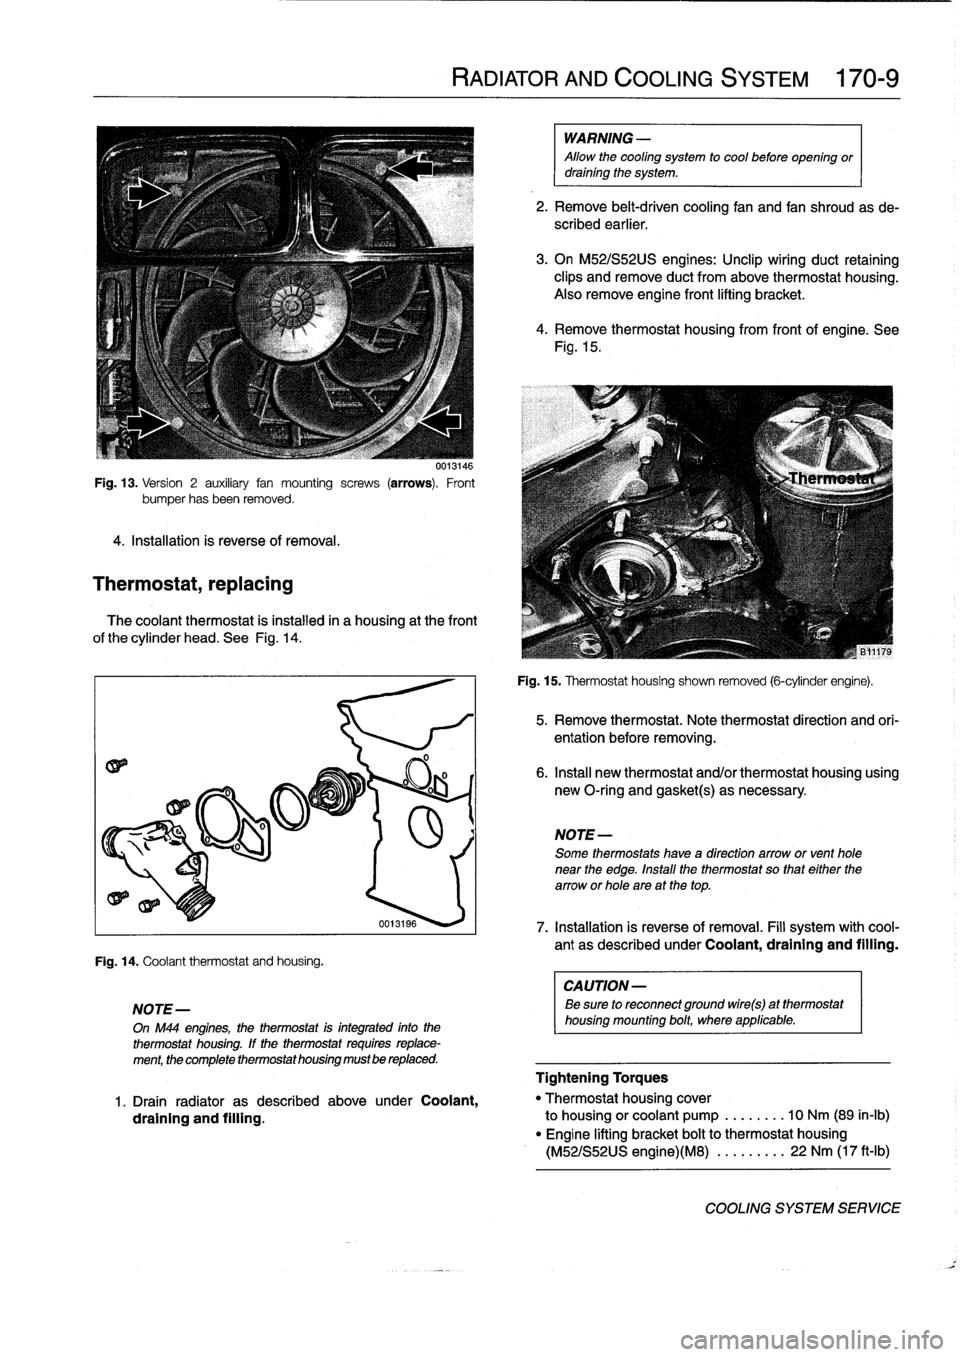 BMW 318i 1997 E36 Repair Manual 
Fig
.
13
.
Version
2
auxiliary
fan
mounting
screws
(arrows)
.
Front
bumper
hasbeen
removed
.

4
.
Installation
is
reverse
of
removal
.

Thermostat,
replacing

0013146

The
coolant
thermostat
is
insta